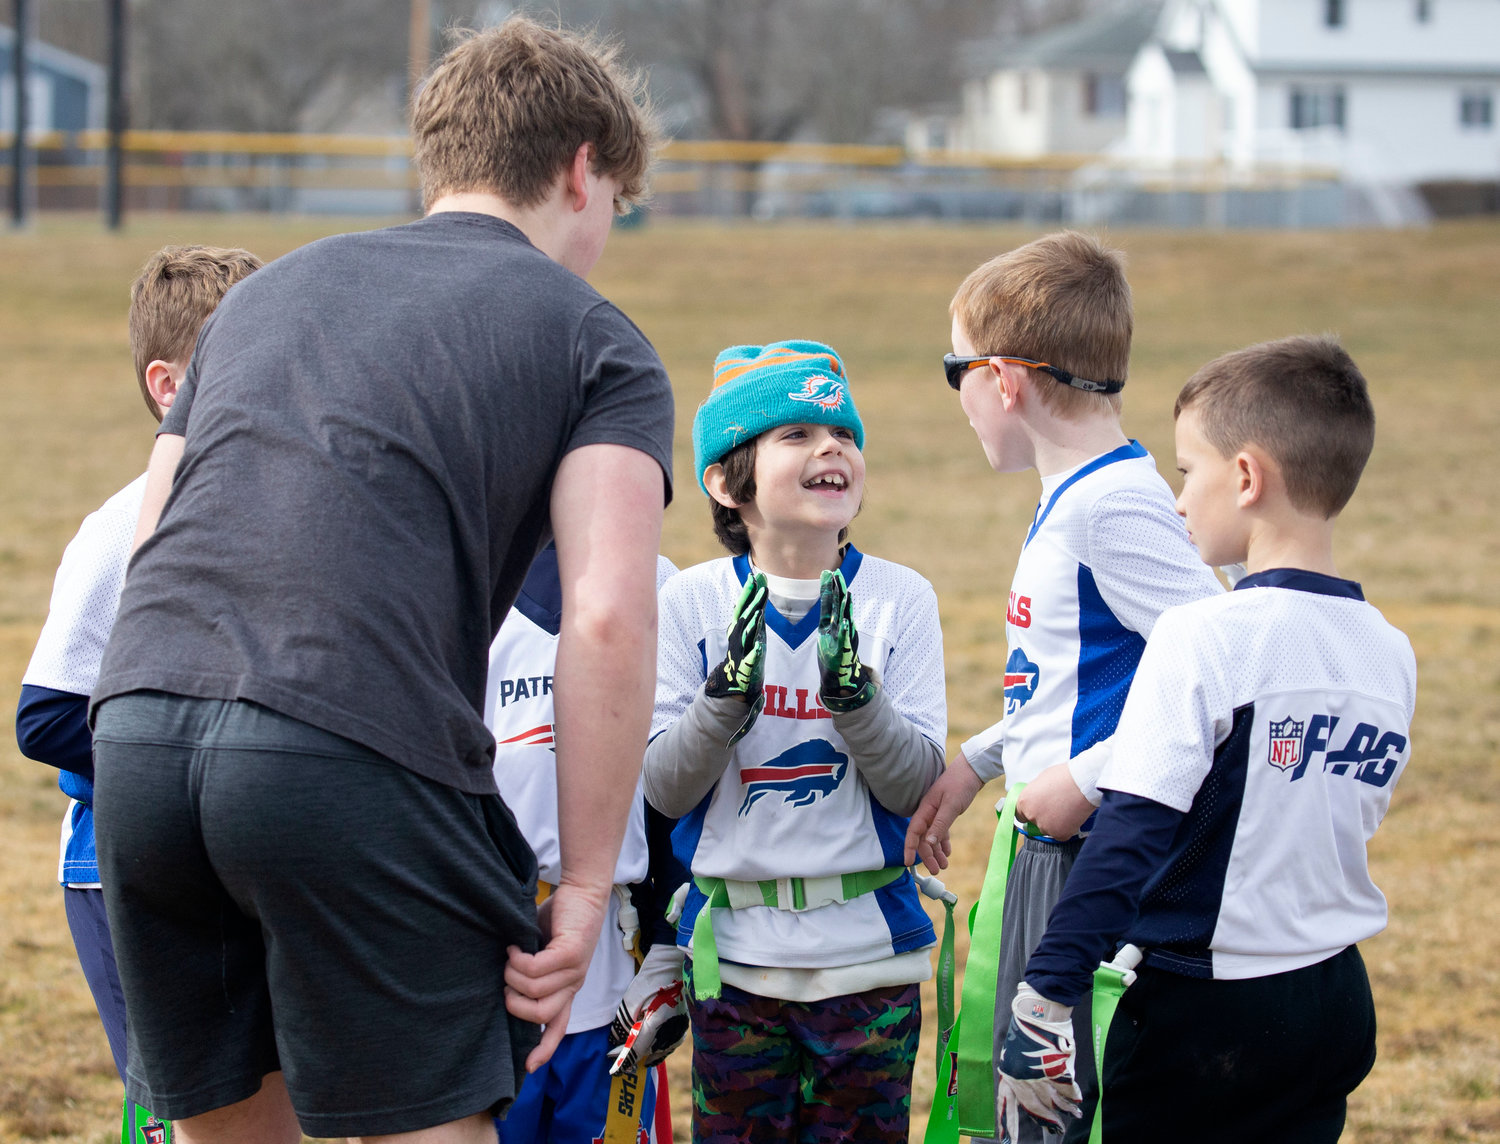 Ben McClelland, a student at Barrington High School, helps coach a team at the flag football tournament which was organized by Ryan O’Connell and Harrison Cooley as part of their Senior Projects.